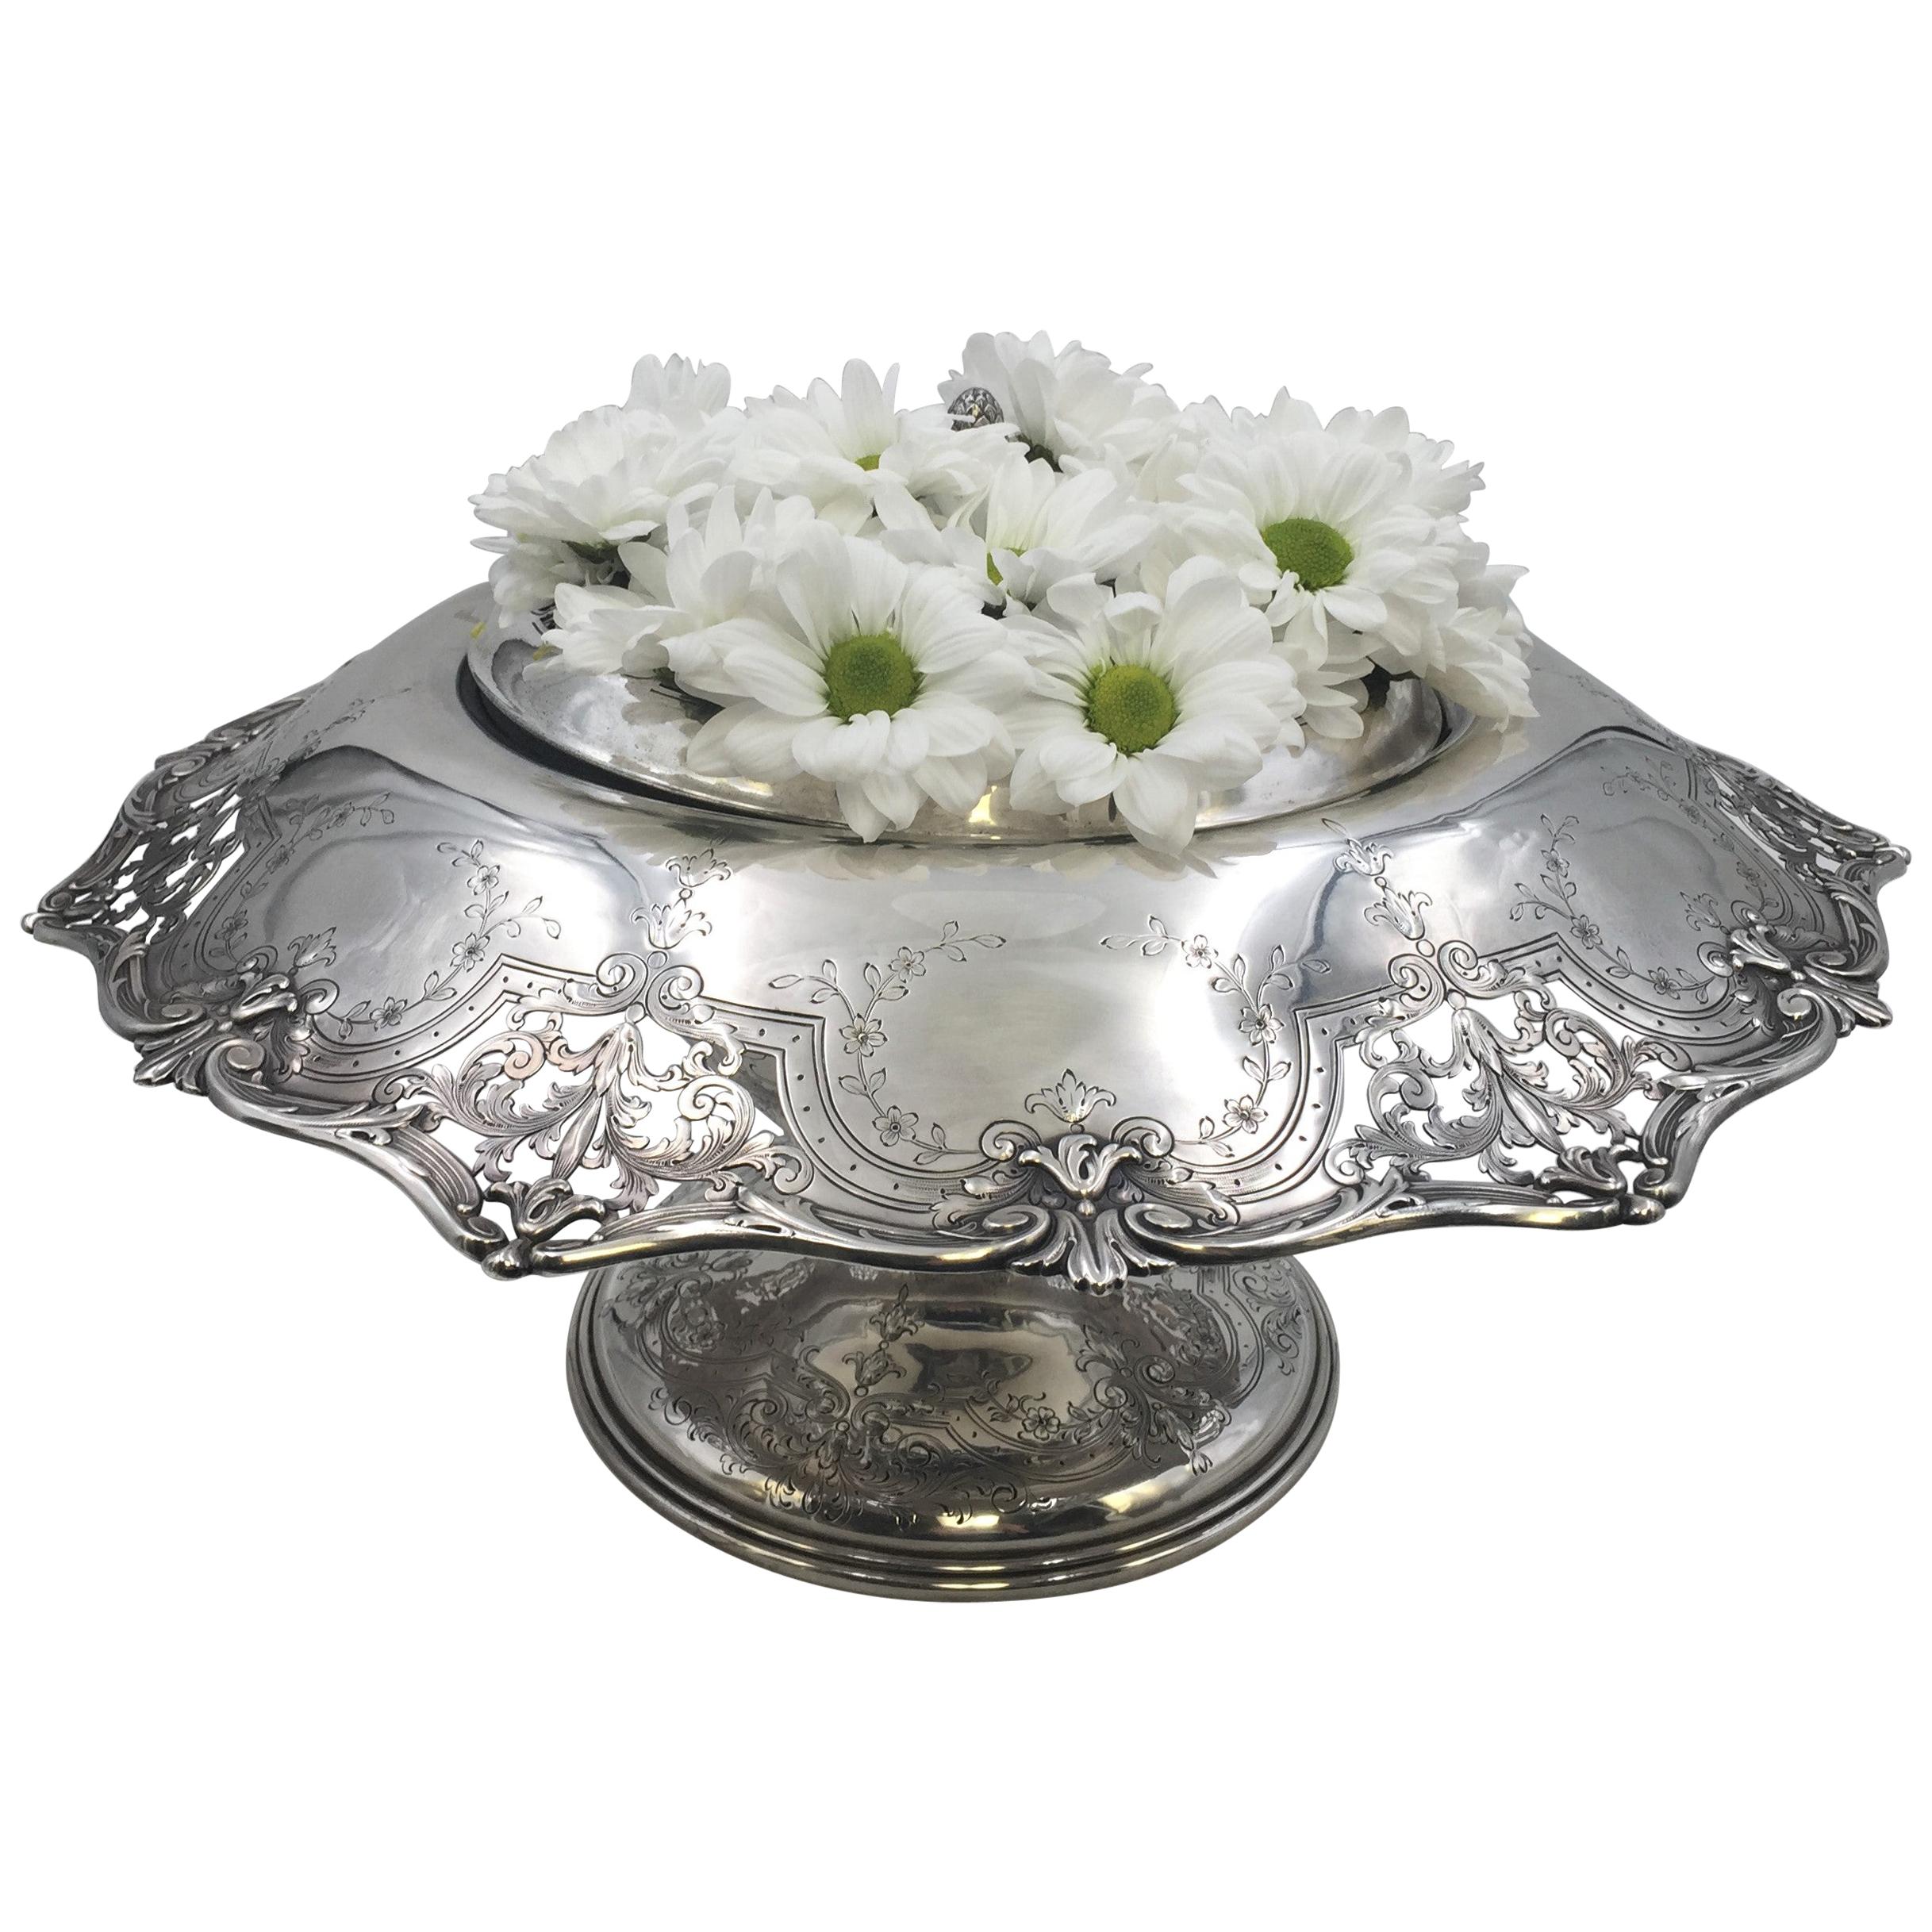 Early 20th Century Graff, Washbourne &Dunn Sterling Silver Rose Bowl Centerpiece